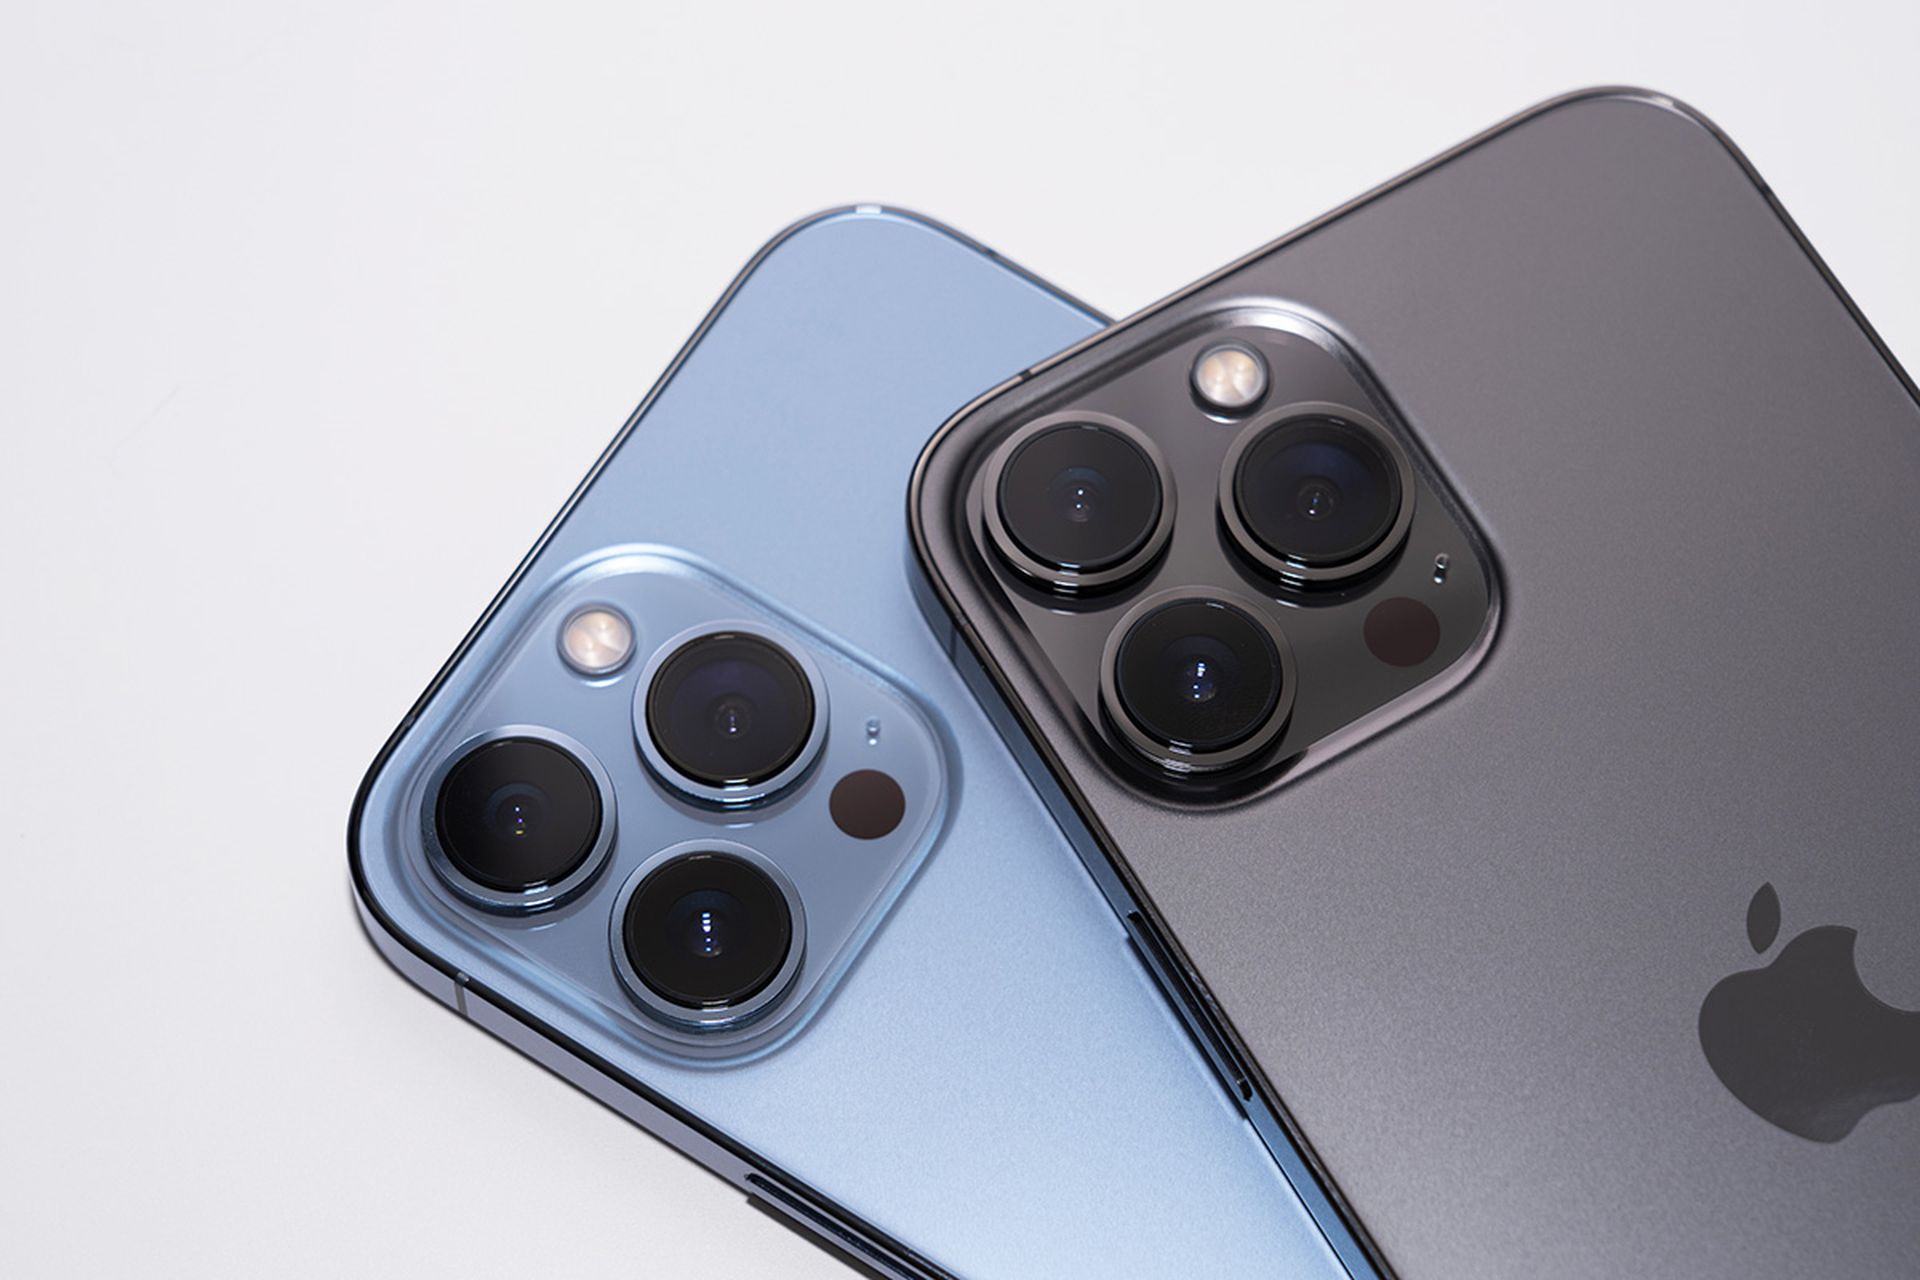 Close up the triple-lens camera on the iPhone 13 Pro Max Seirra Blue and Graphite Color on white background.